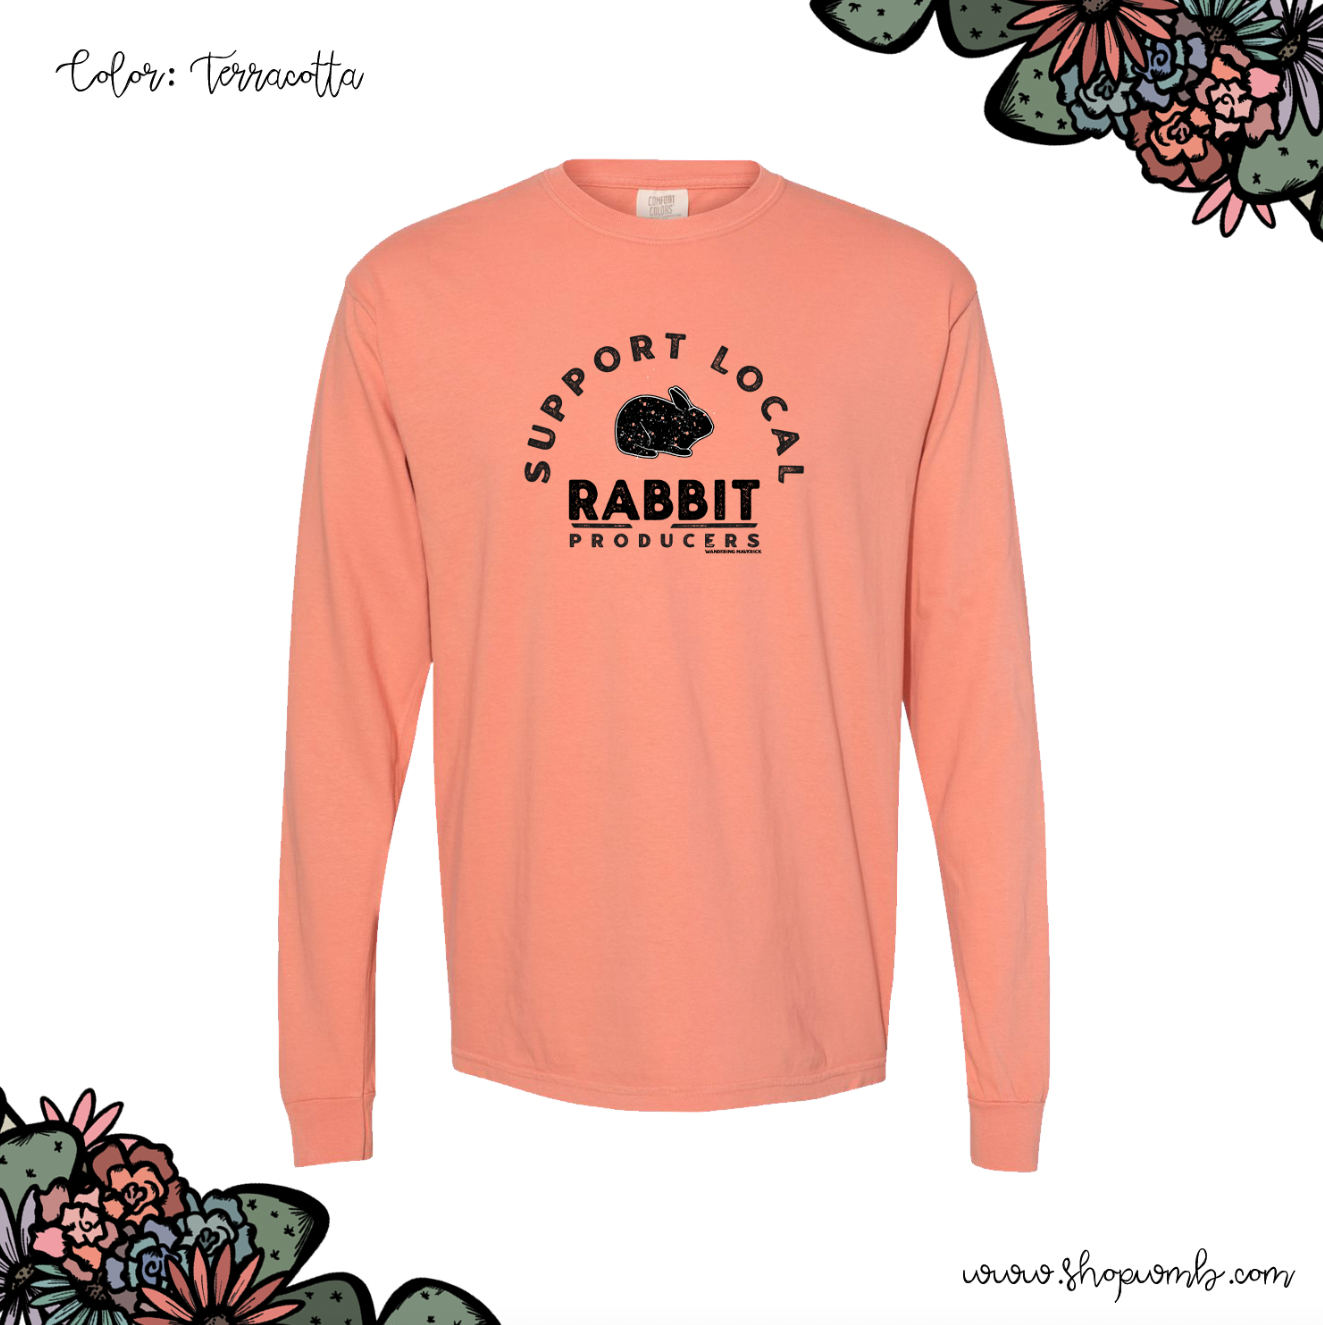 Support Local Rabbit Producers LONG SLEEVE T-Shirt (S-3XL) - Multiple Colors!